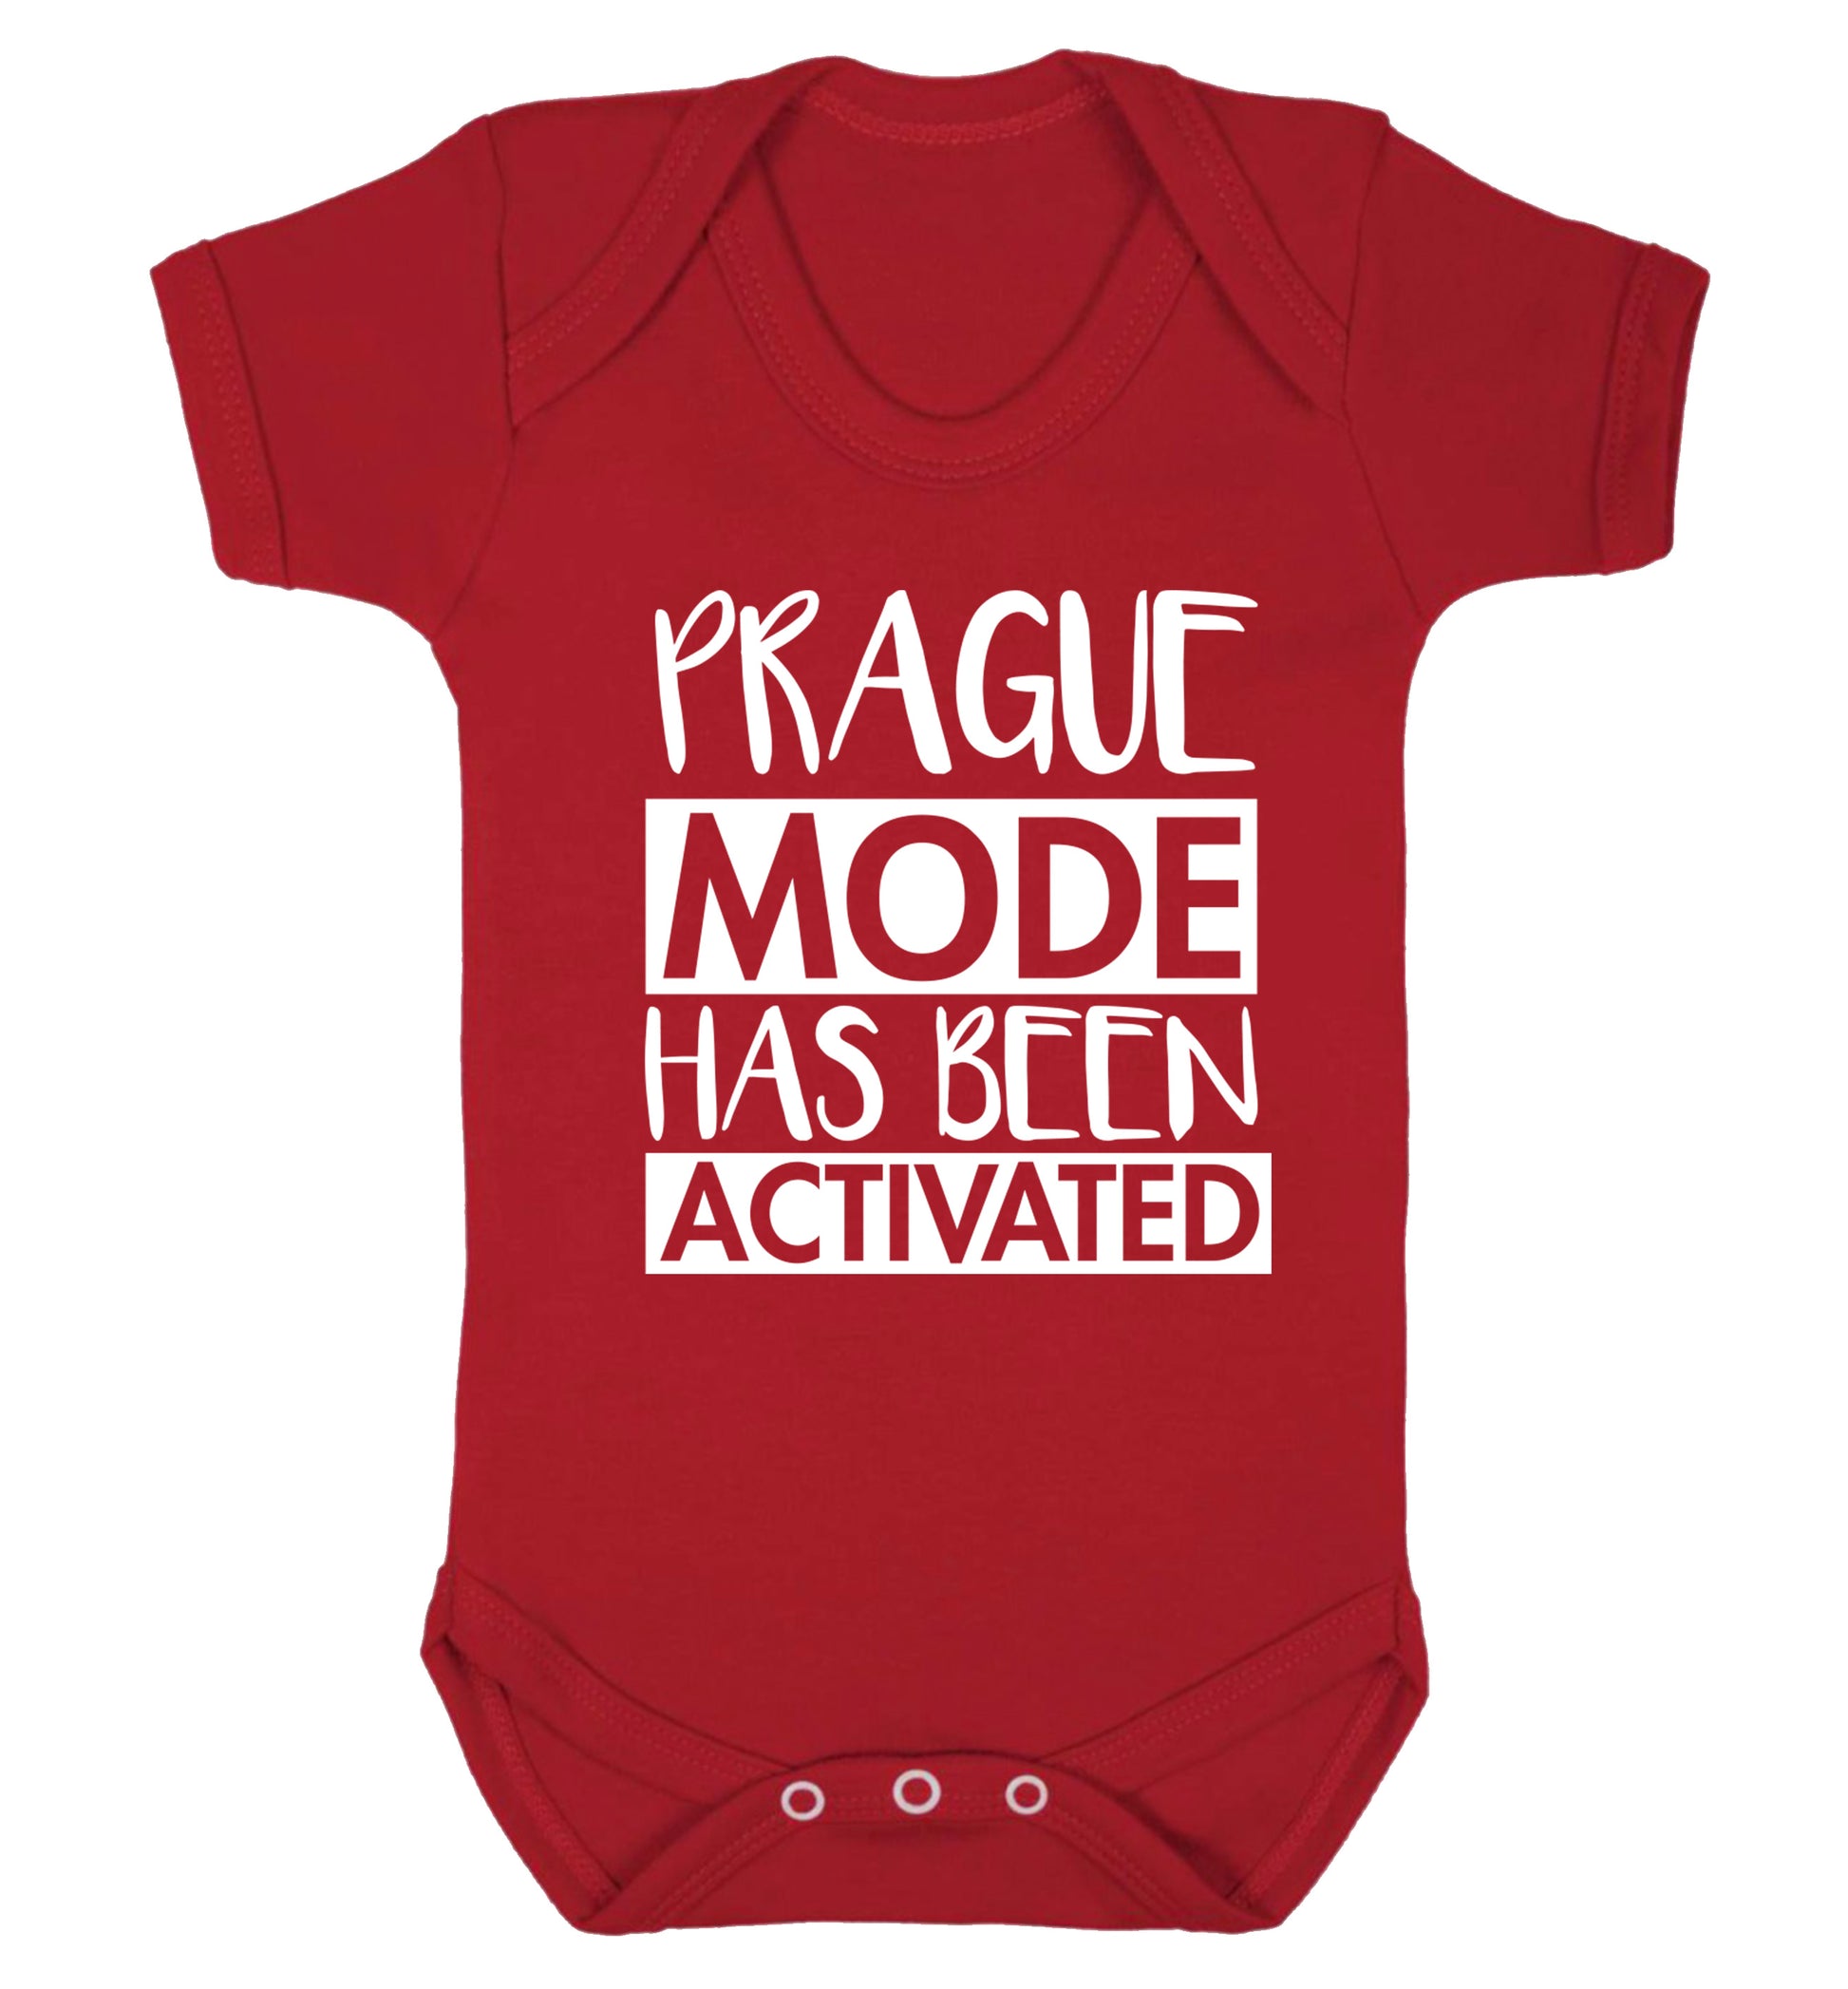 Prague mode has been activated Baby Vest red 18-24 months